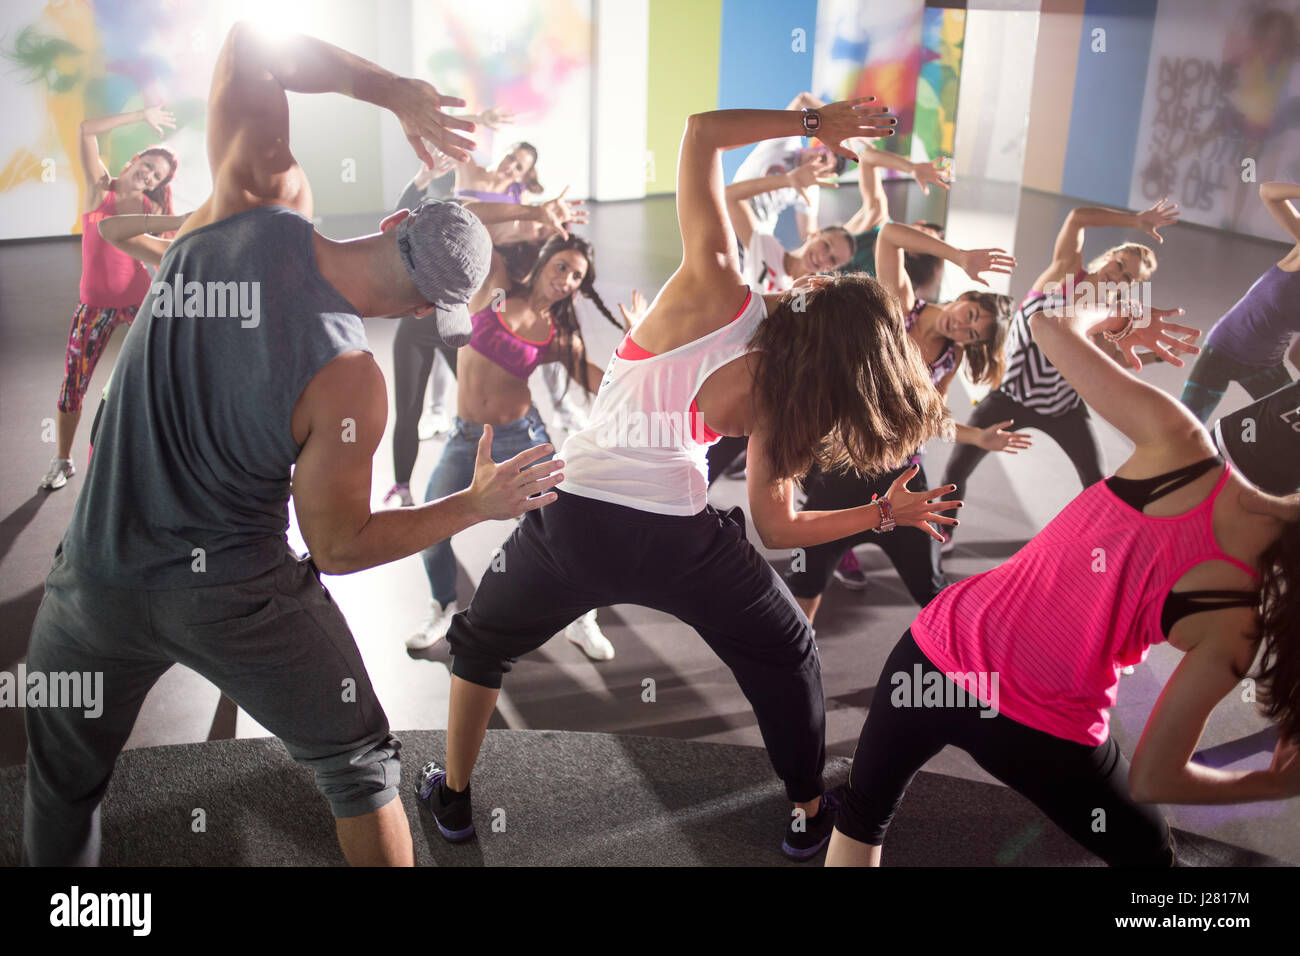 group of dancers at fitness training in studio Stock Photo